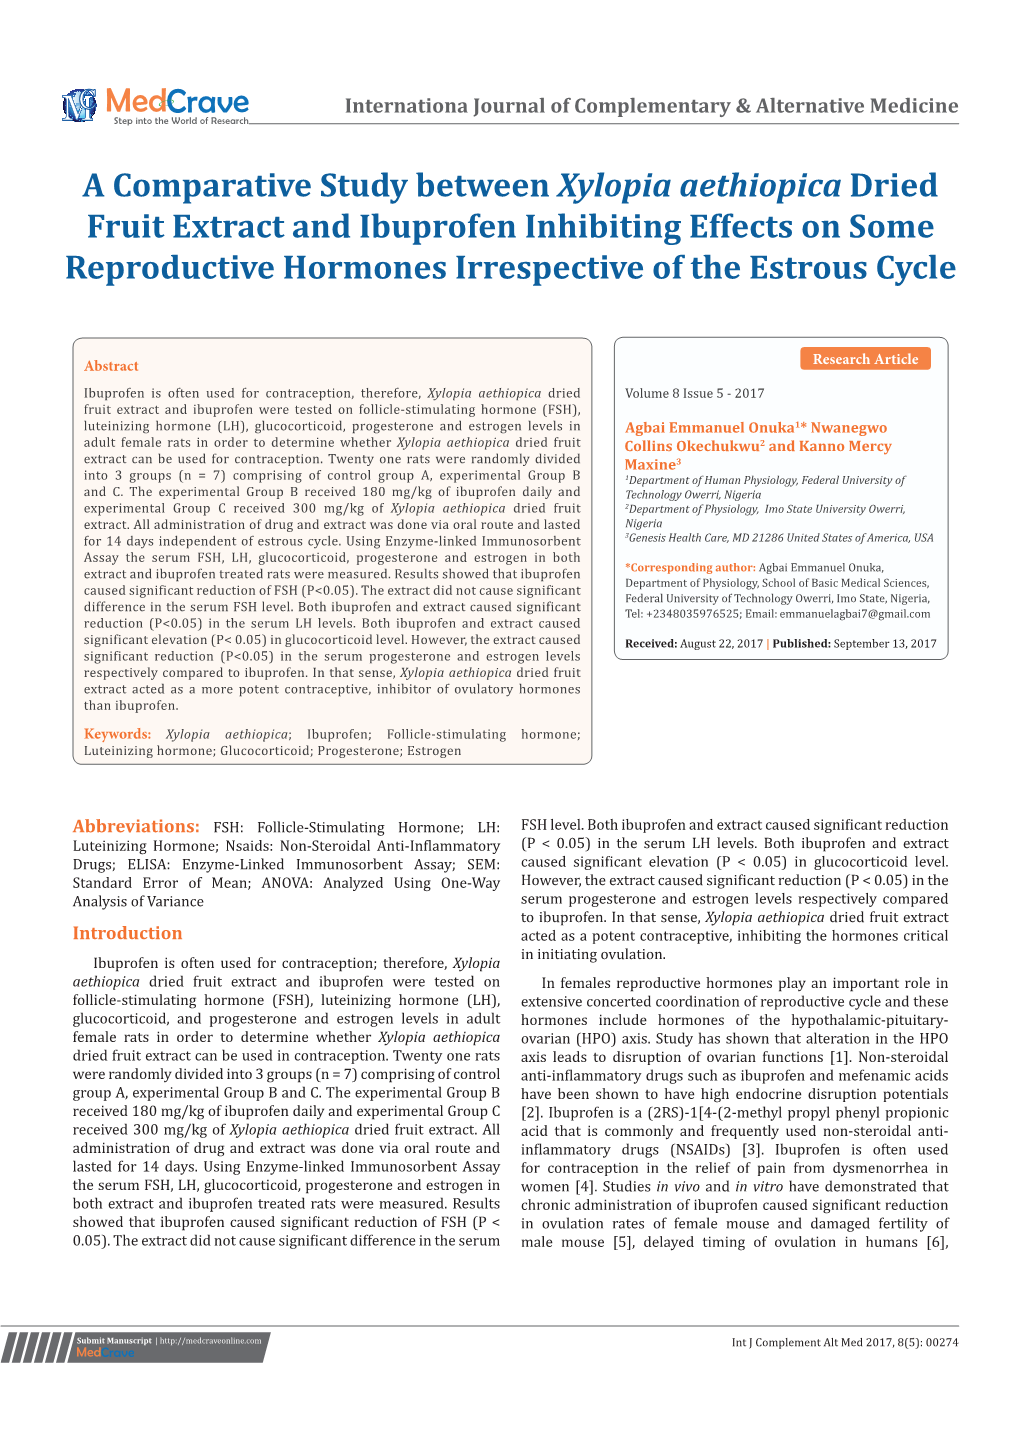 A Comparative Study Between Xylopia Aethiopica Dried Fruit Extract and Ibuprofen Inhibiting Effects on Some Reproductive Hormones Irrespective of the Estrous Cycle